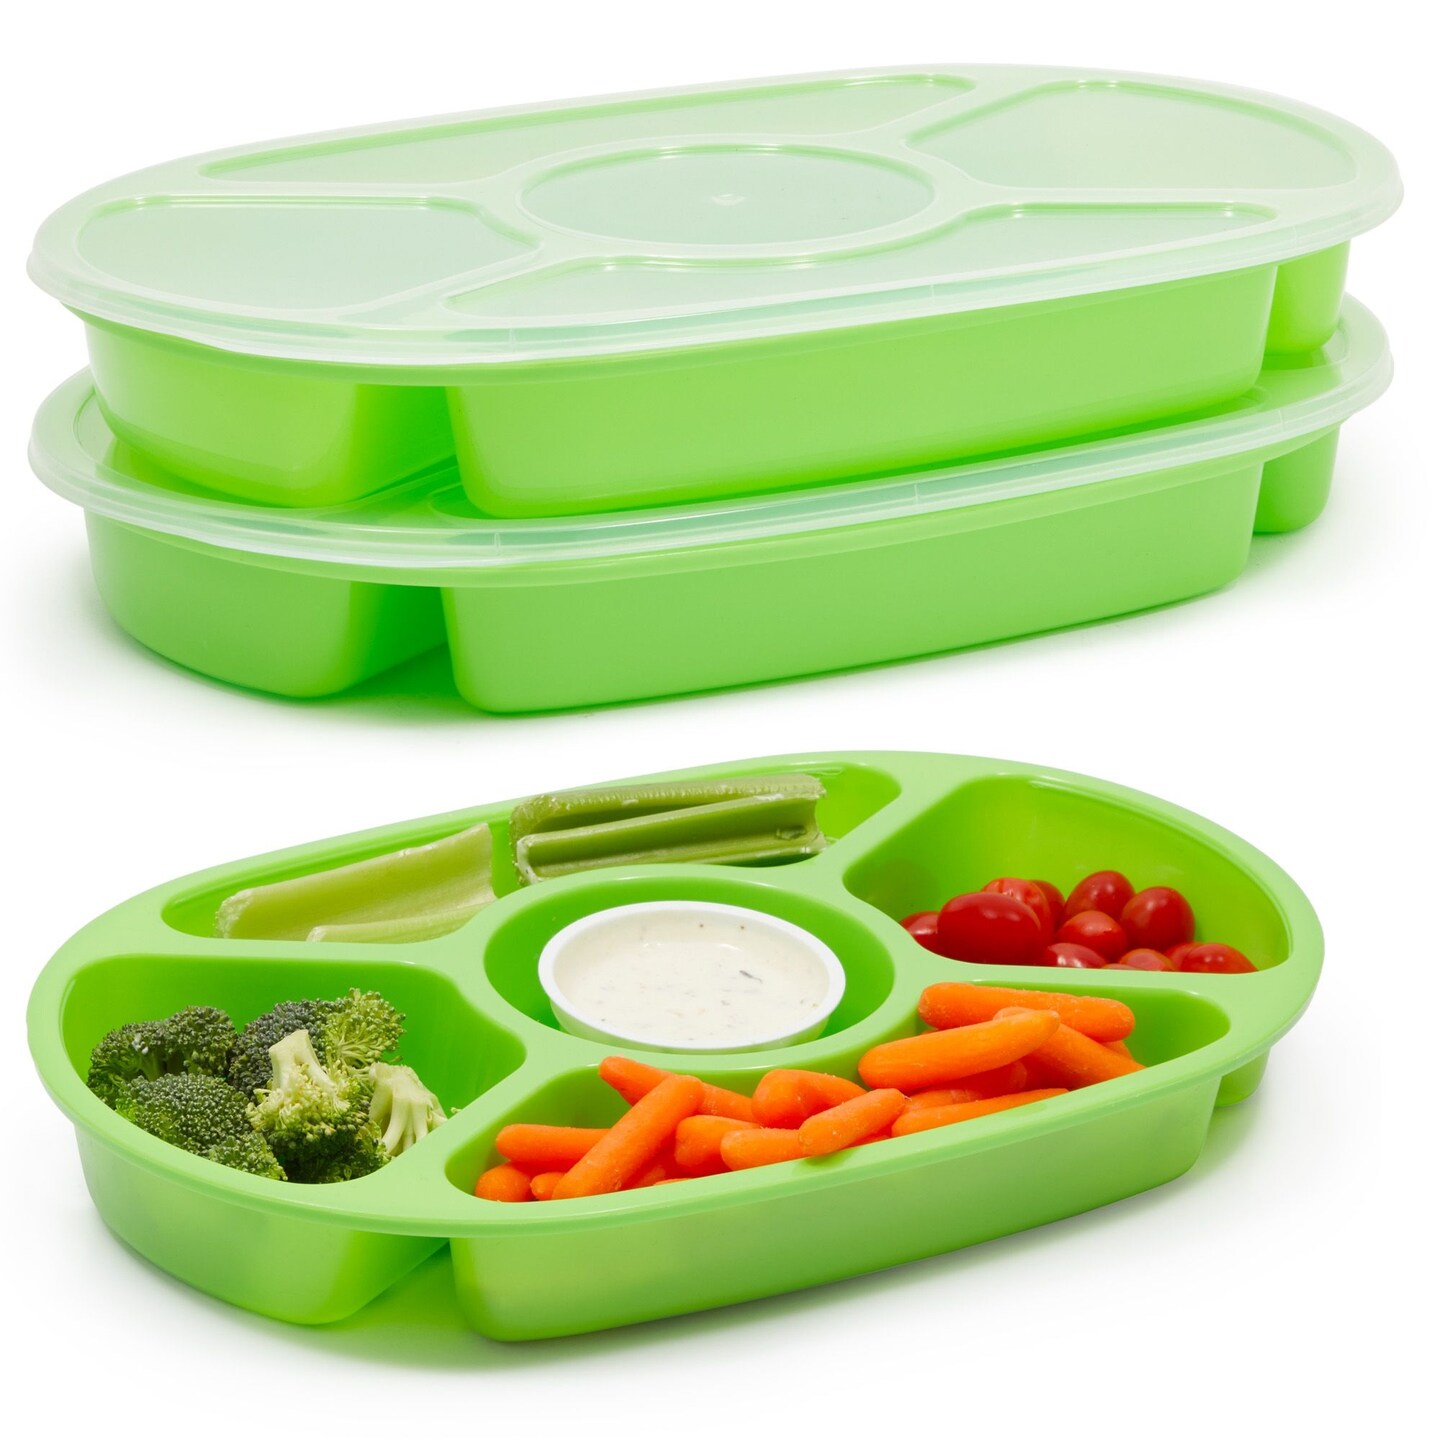 Plastic Divided Serving Platter Tray with Lid (Light Green, 2 Pack)